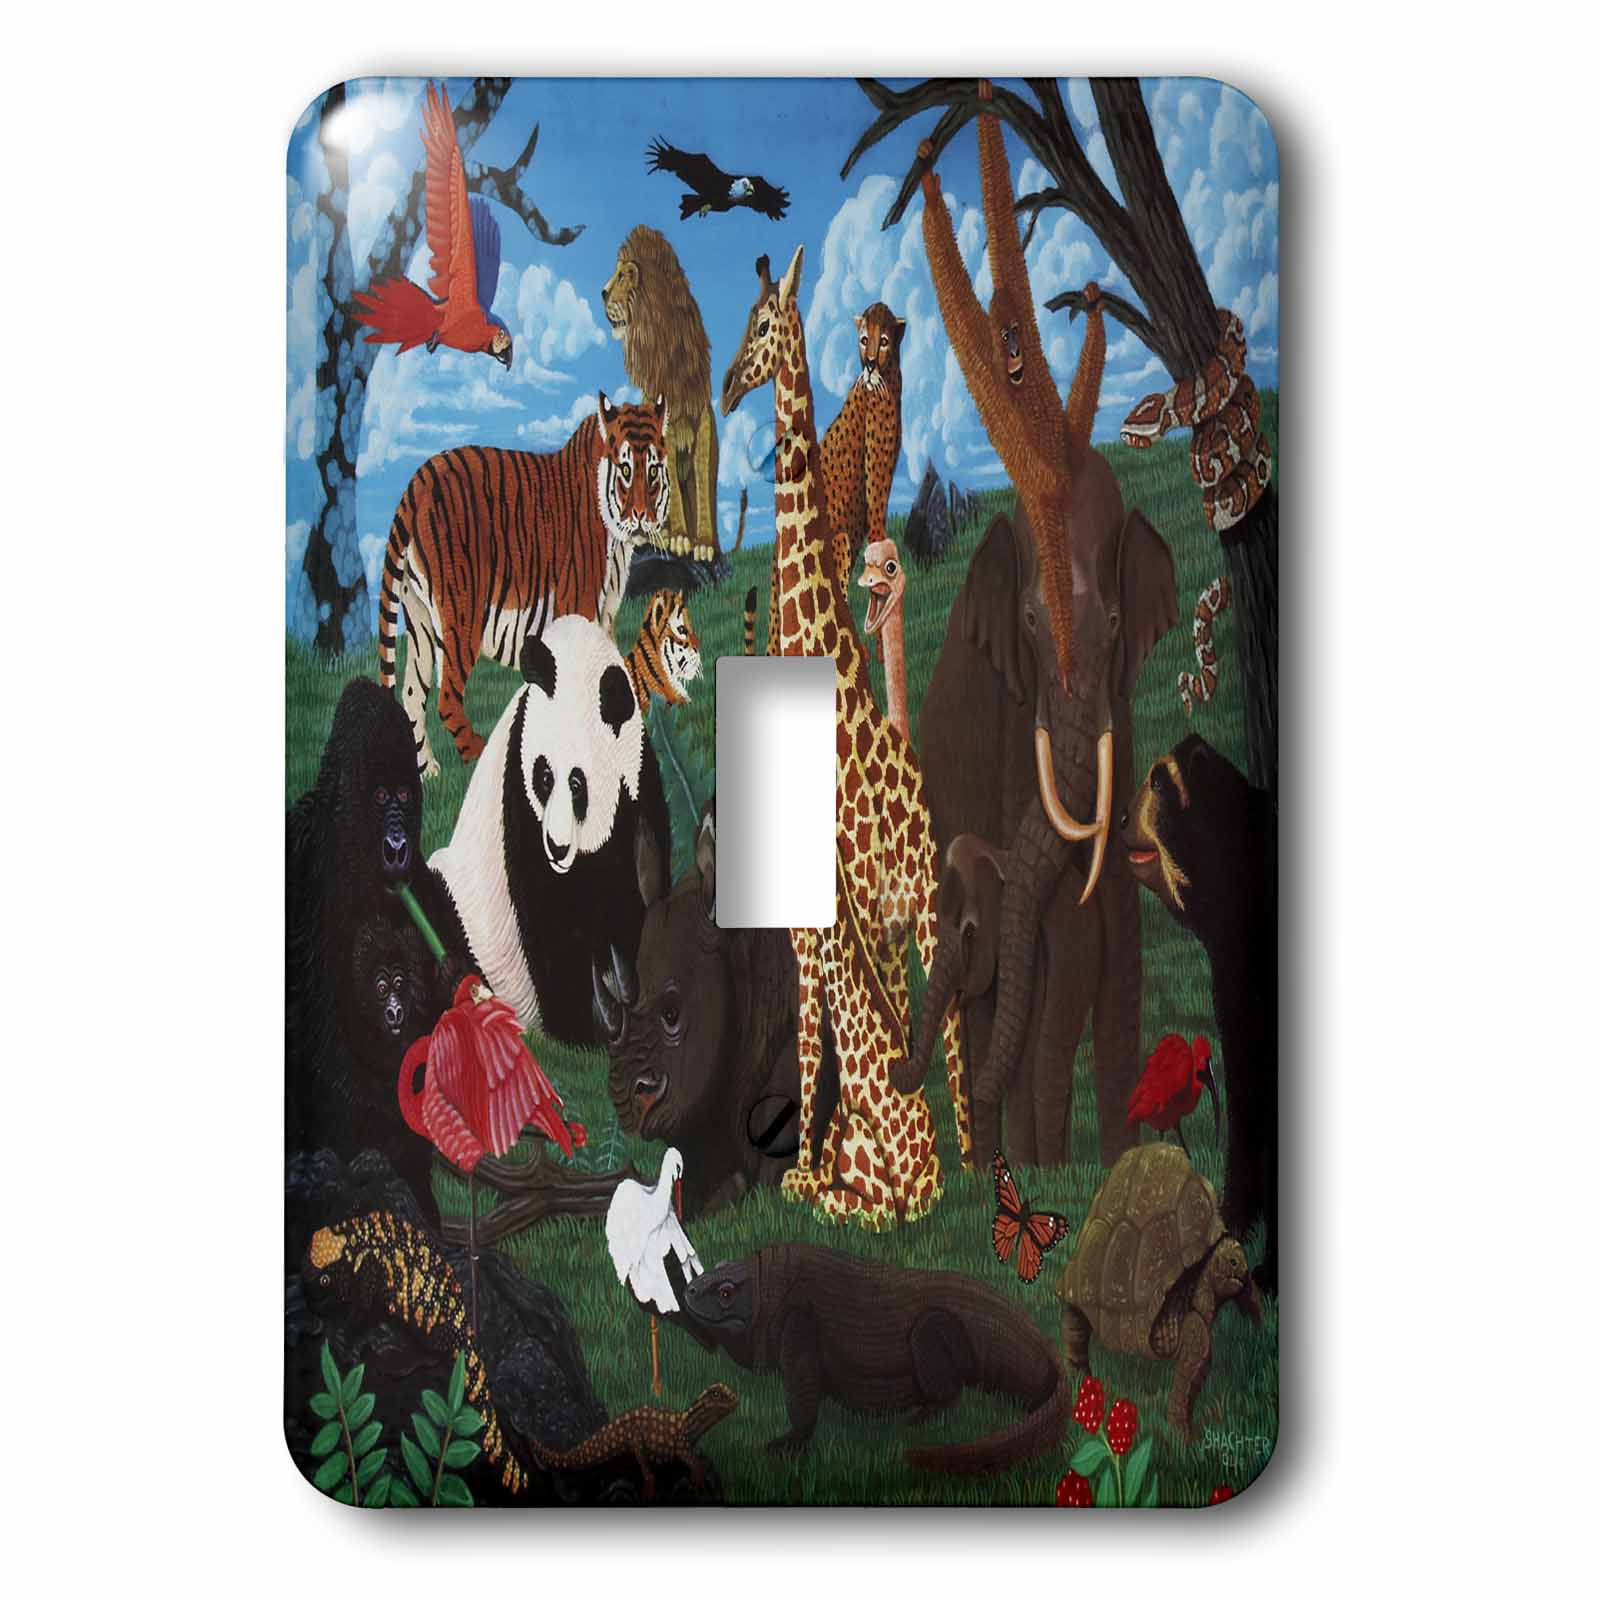 3dRose lsp_41033_1 Funny Zoo Animals Single Toggle Switch